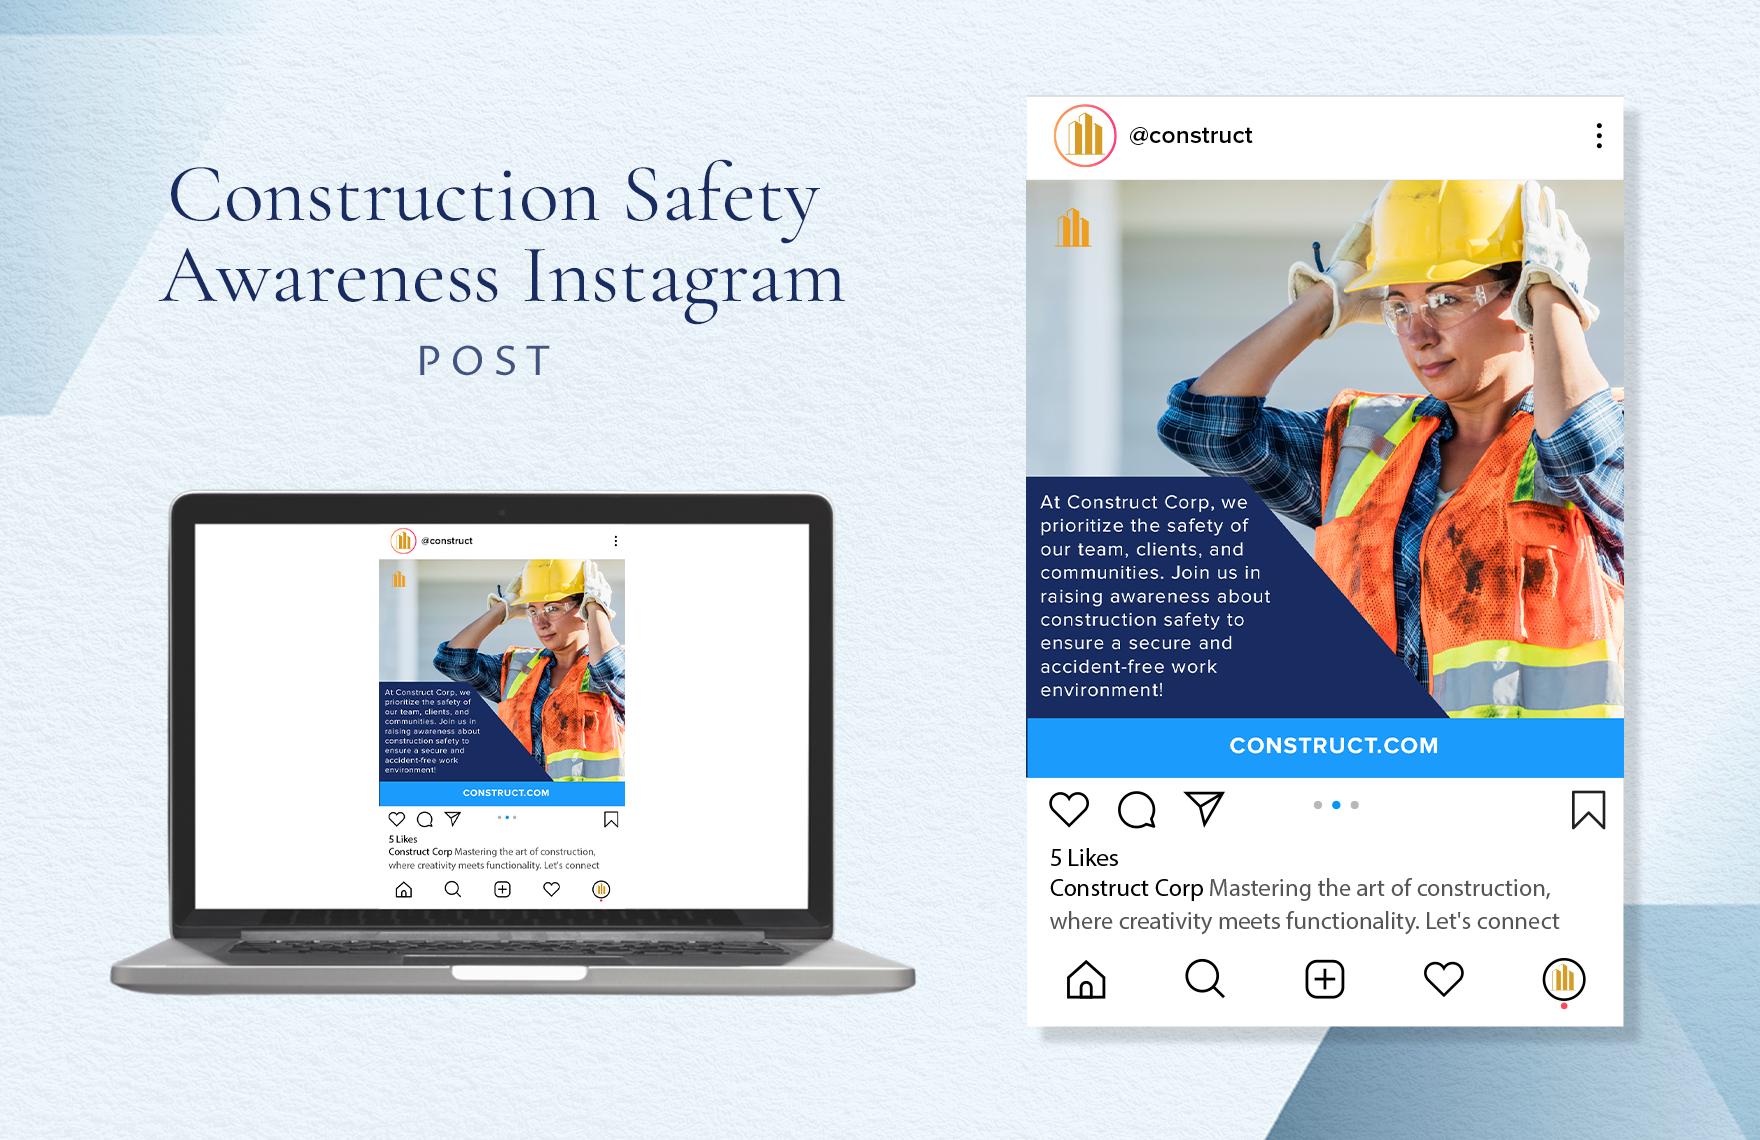 Construction Safety Awareness Instagram Post